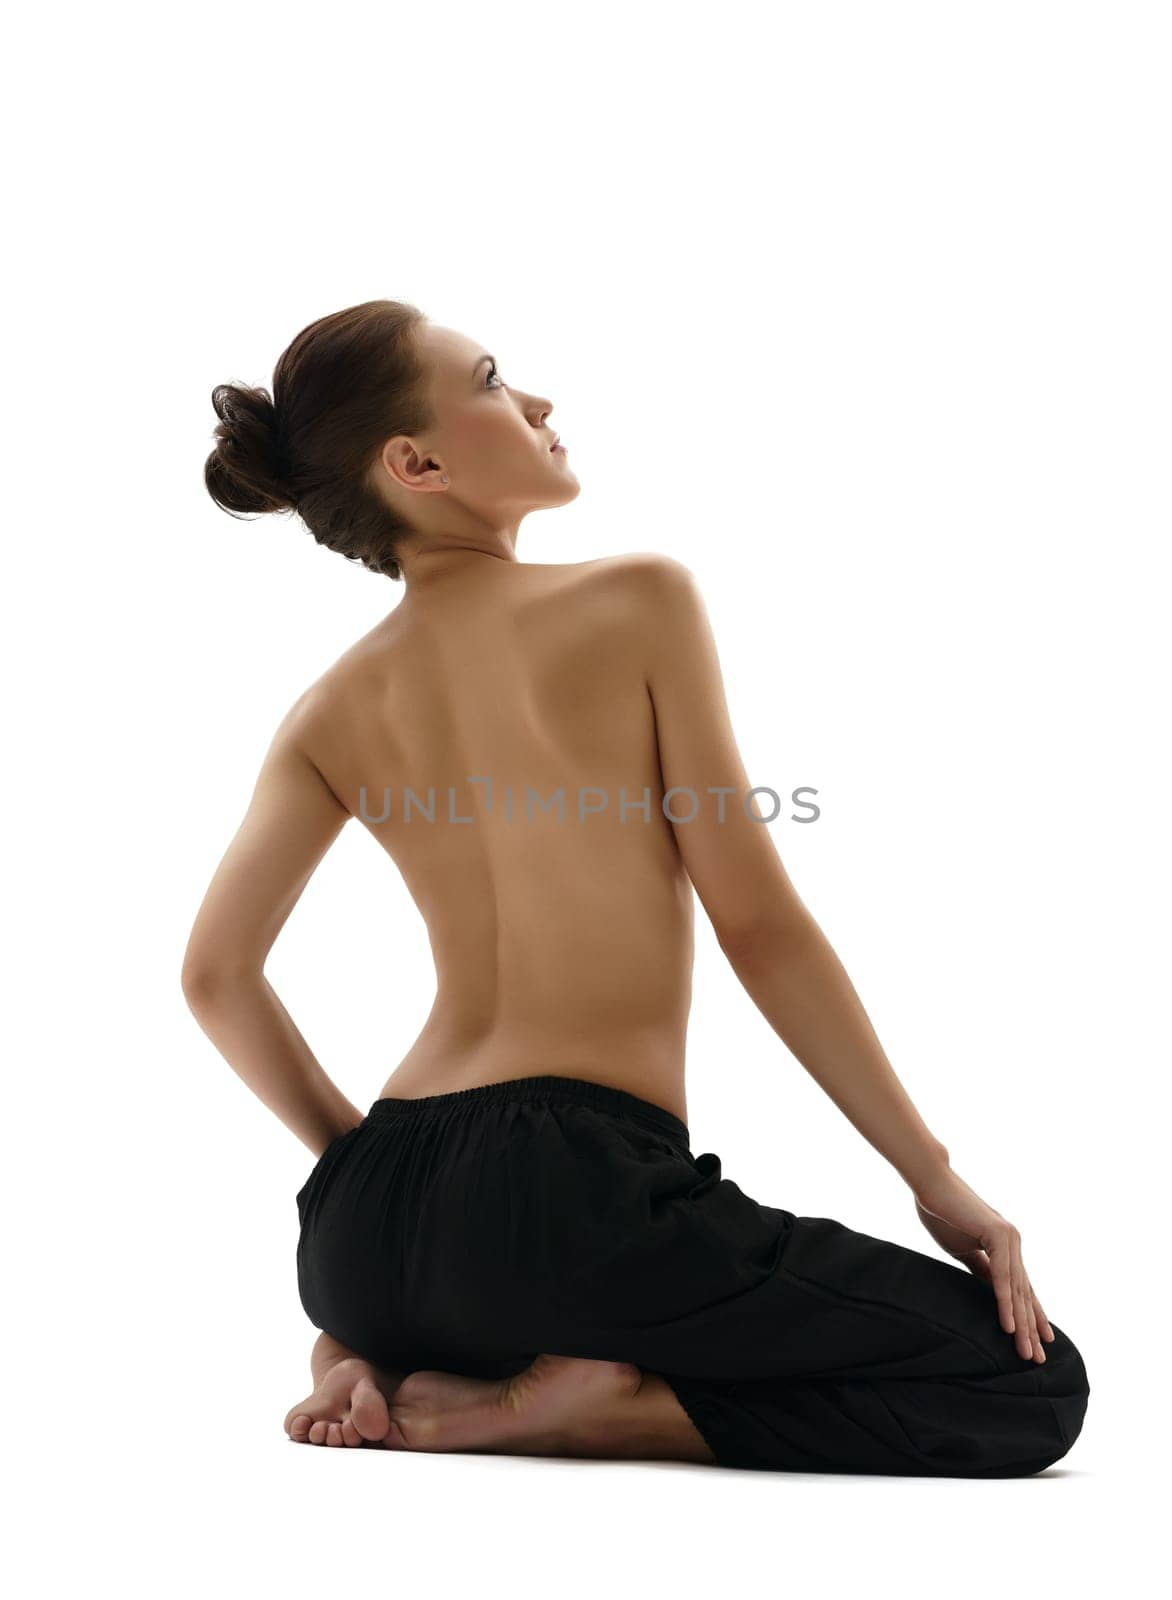 Topless young woman posing in wide trousers by rivertime